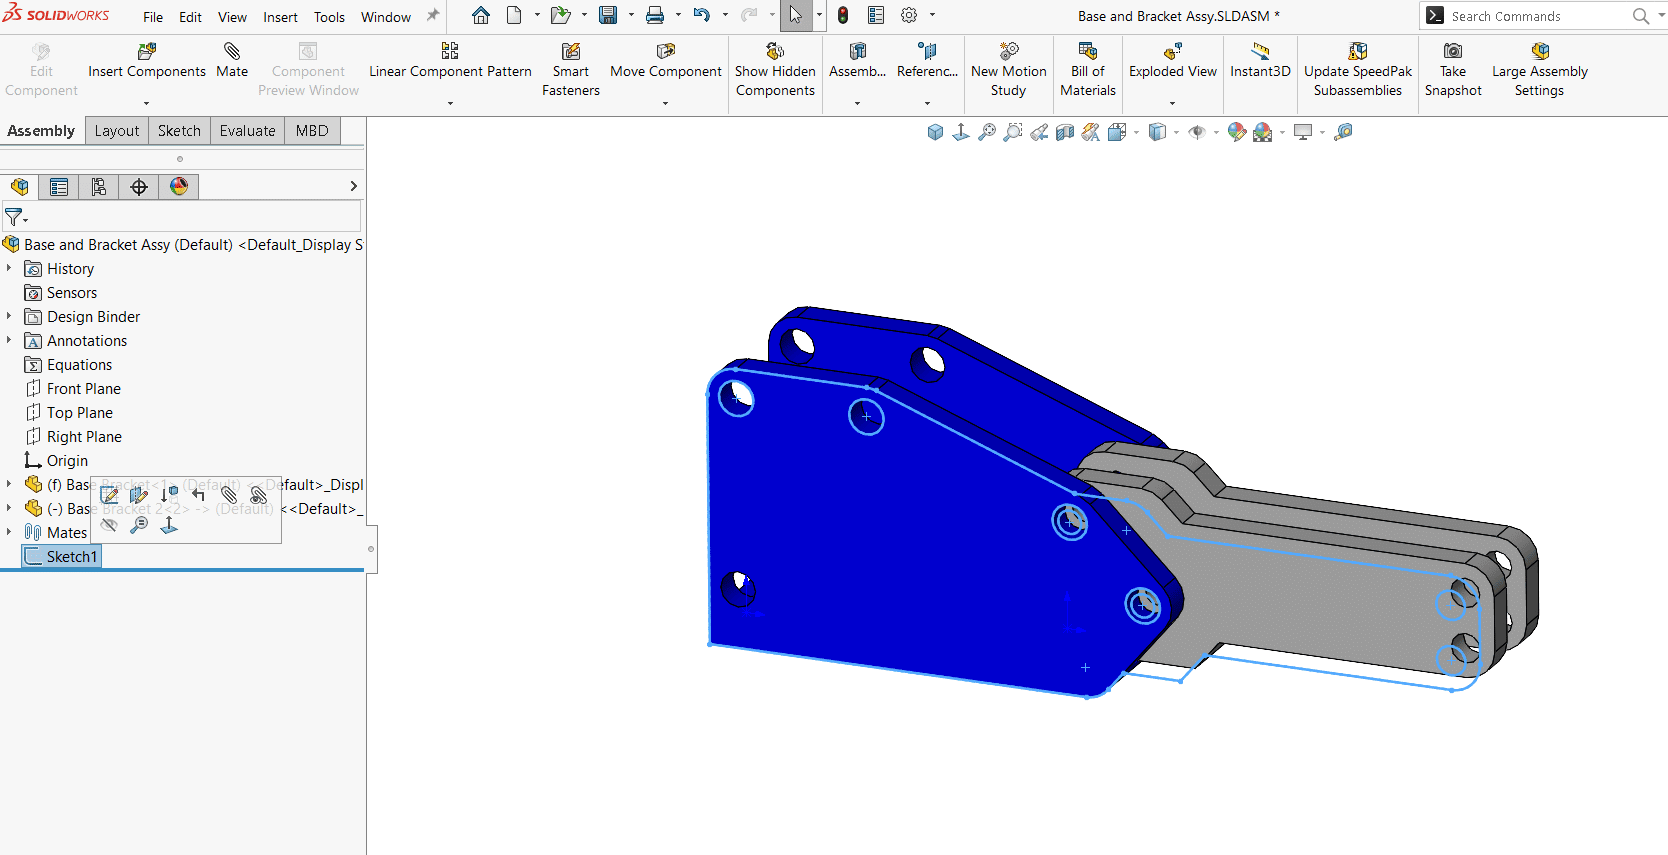 Reuse sketches in SOLIDWORKS, How to Reuse Sketches in SOLIDWORKS